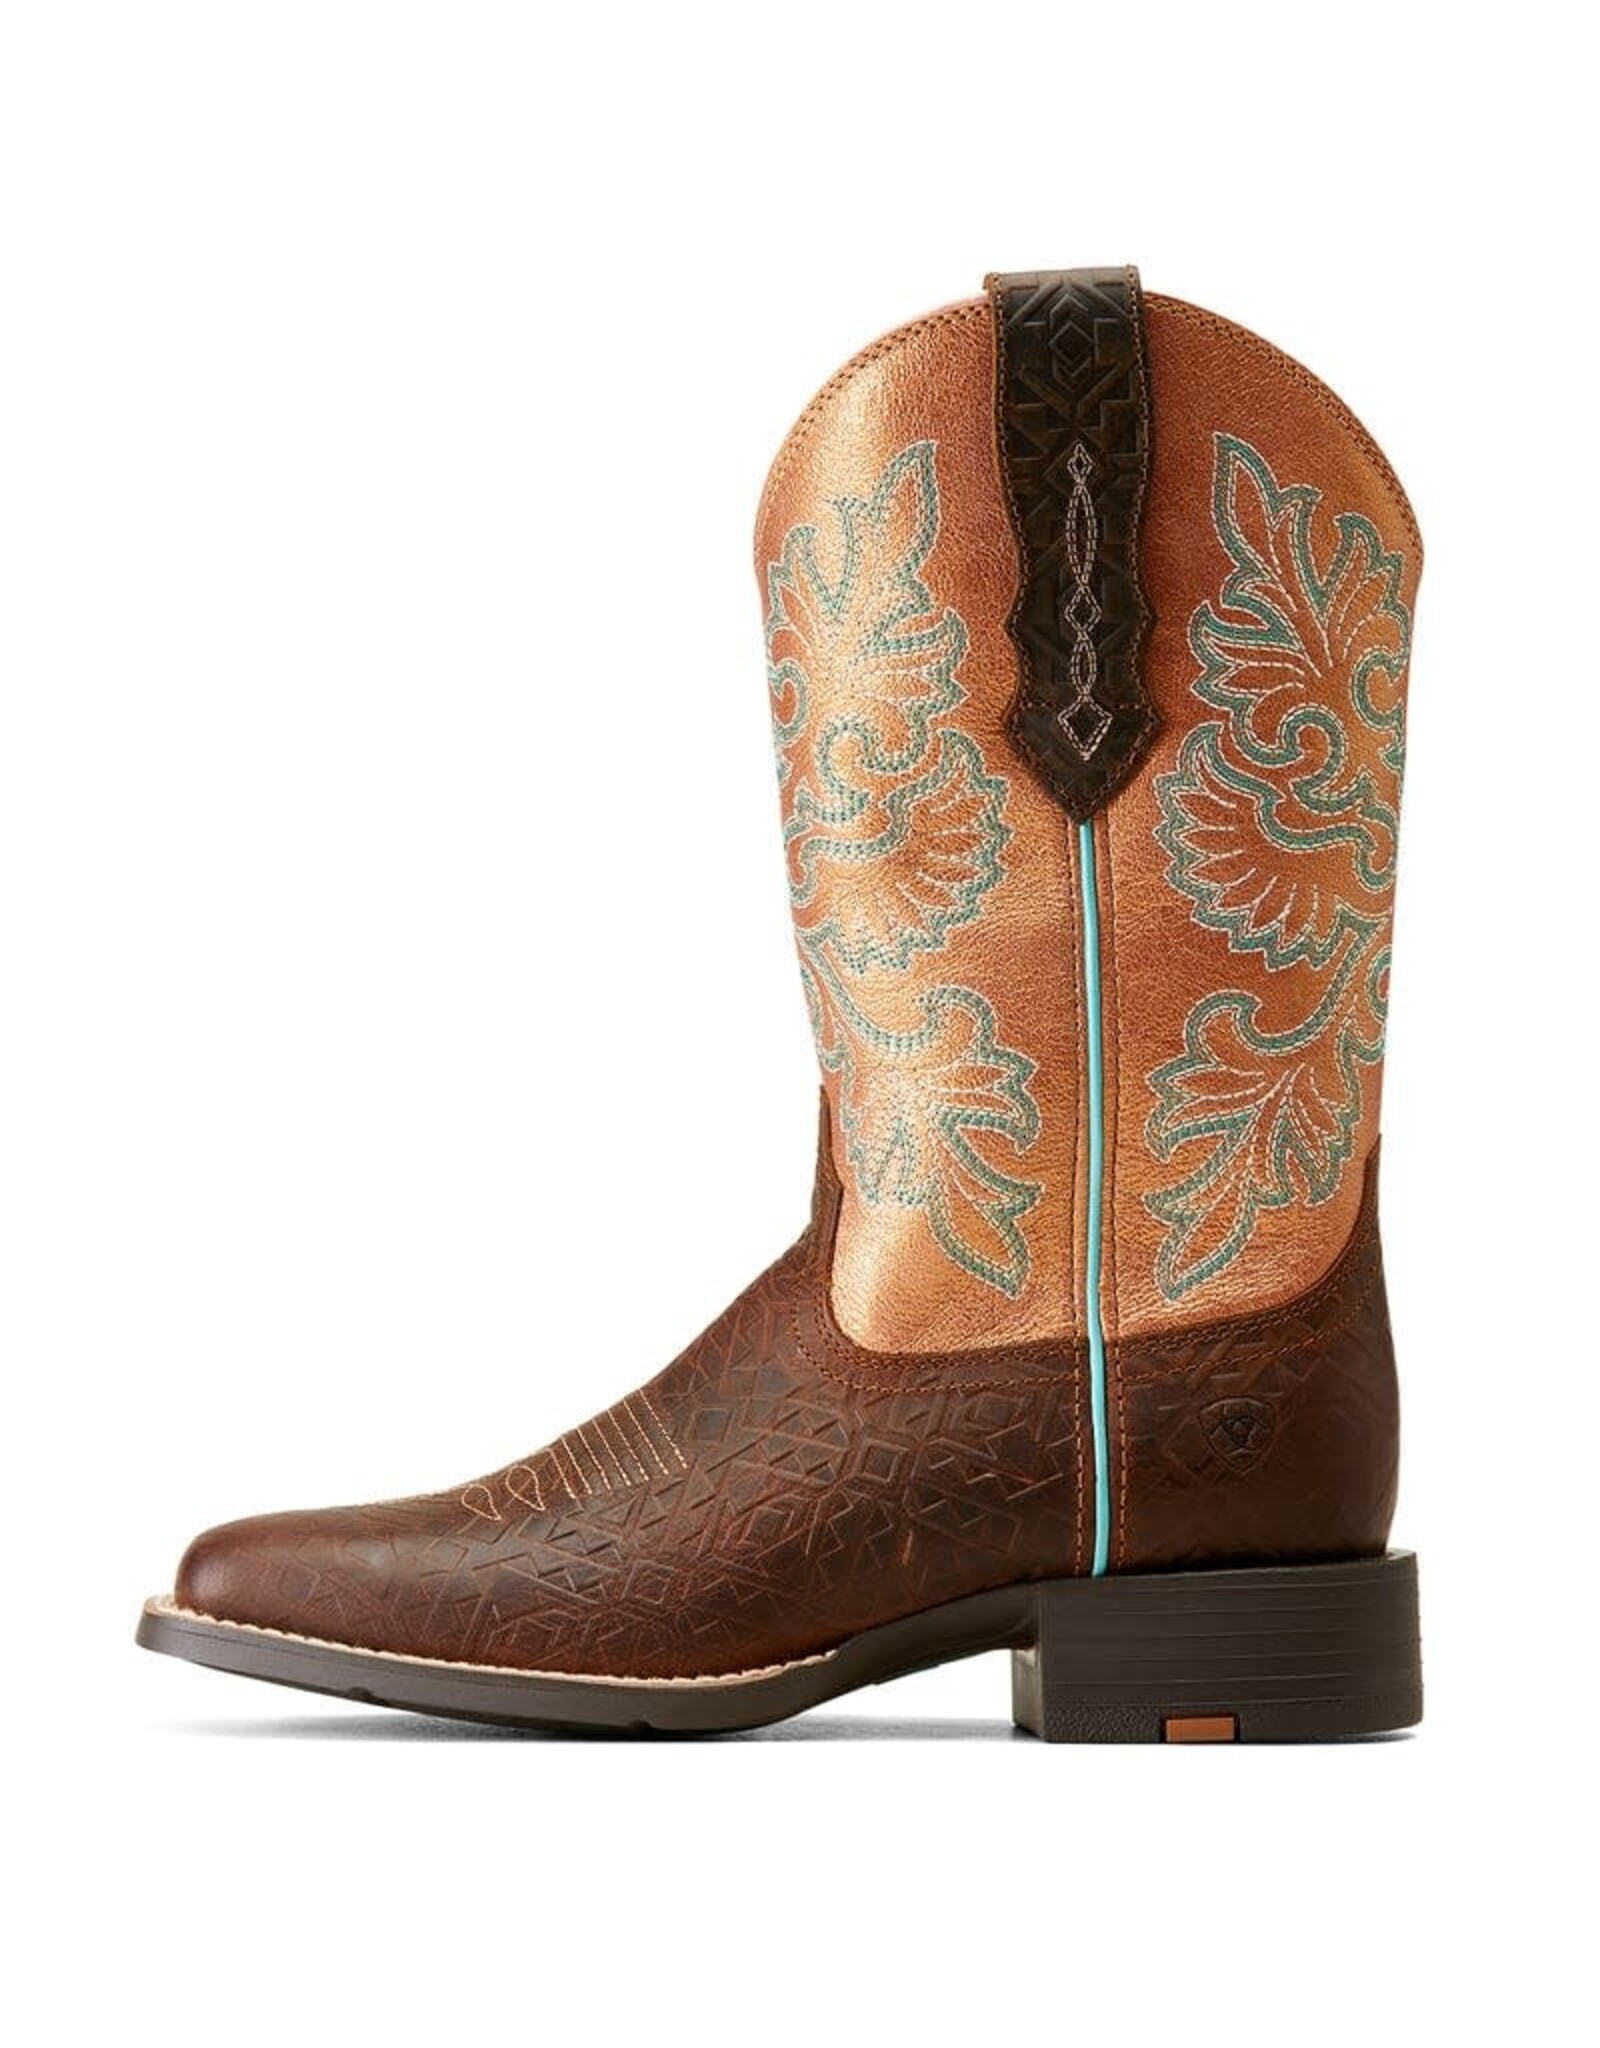 Ariat Ladies Round Up Stretchfit 10047039 Toasted Blanket Embossed/Copper Glow Western Boots